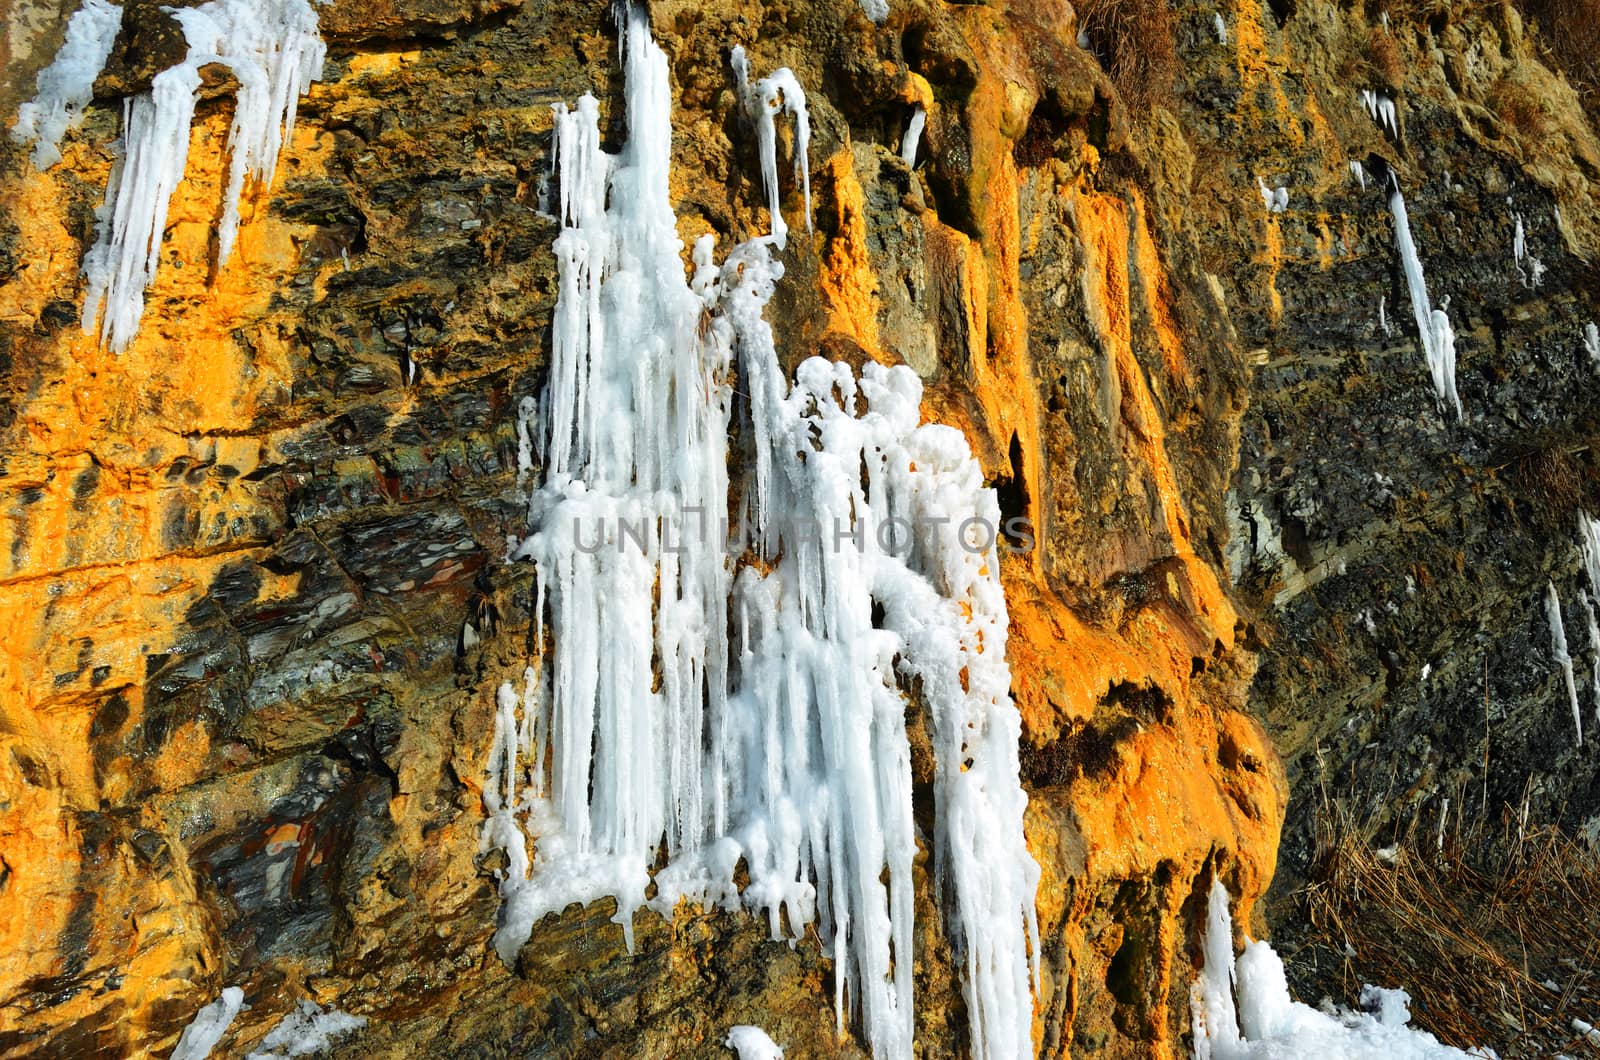 Steep rock with a frozen waterfall near the sea